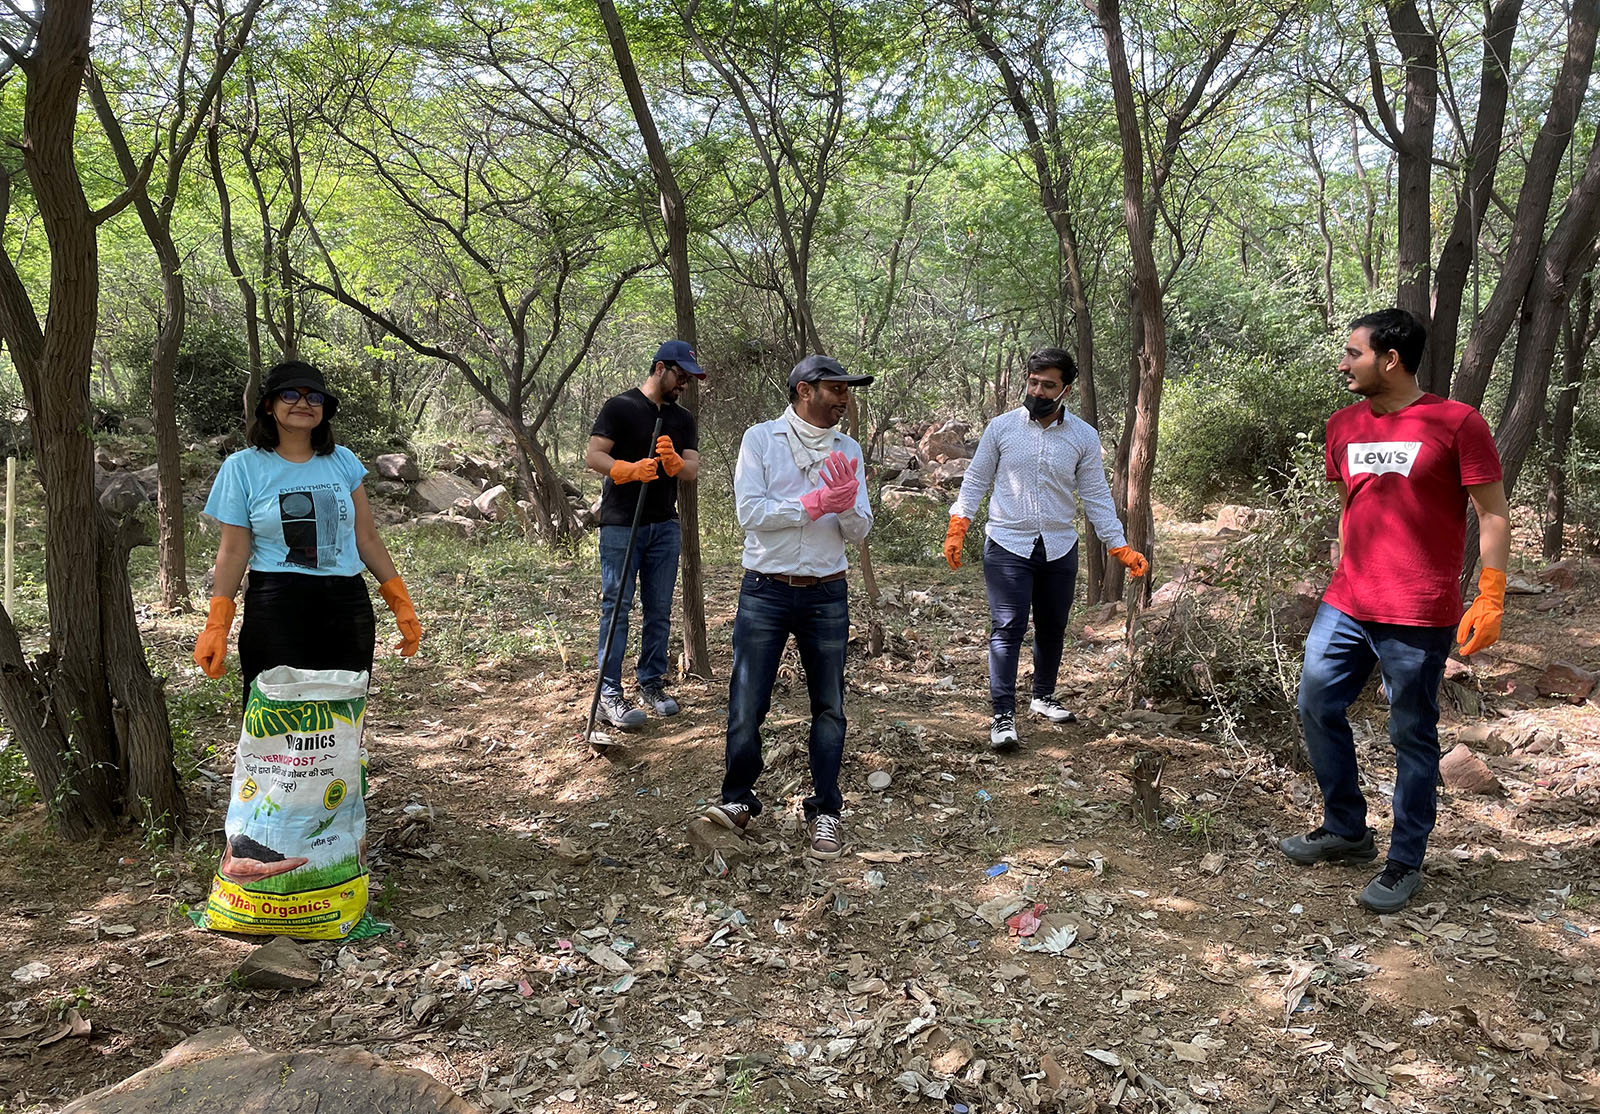 Kline staffers in India lend a helping hand to iamgurgaon, a citizen’s initiative focused on restoring Gurugram’s green habitat, in celebration of Earth Day